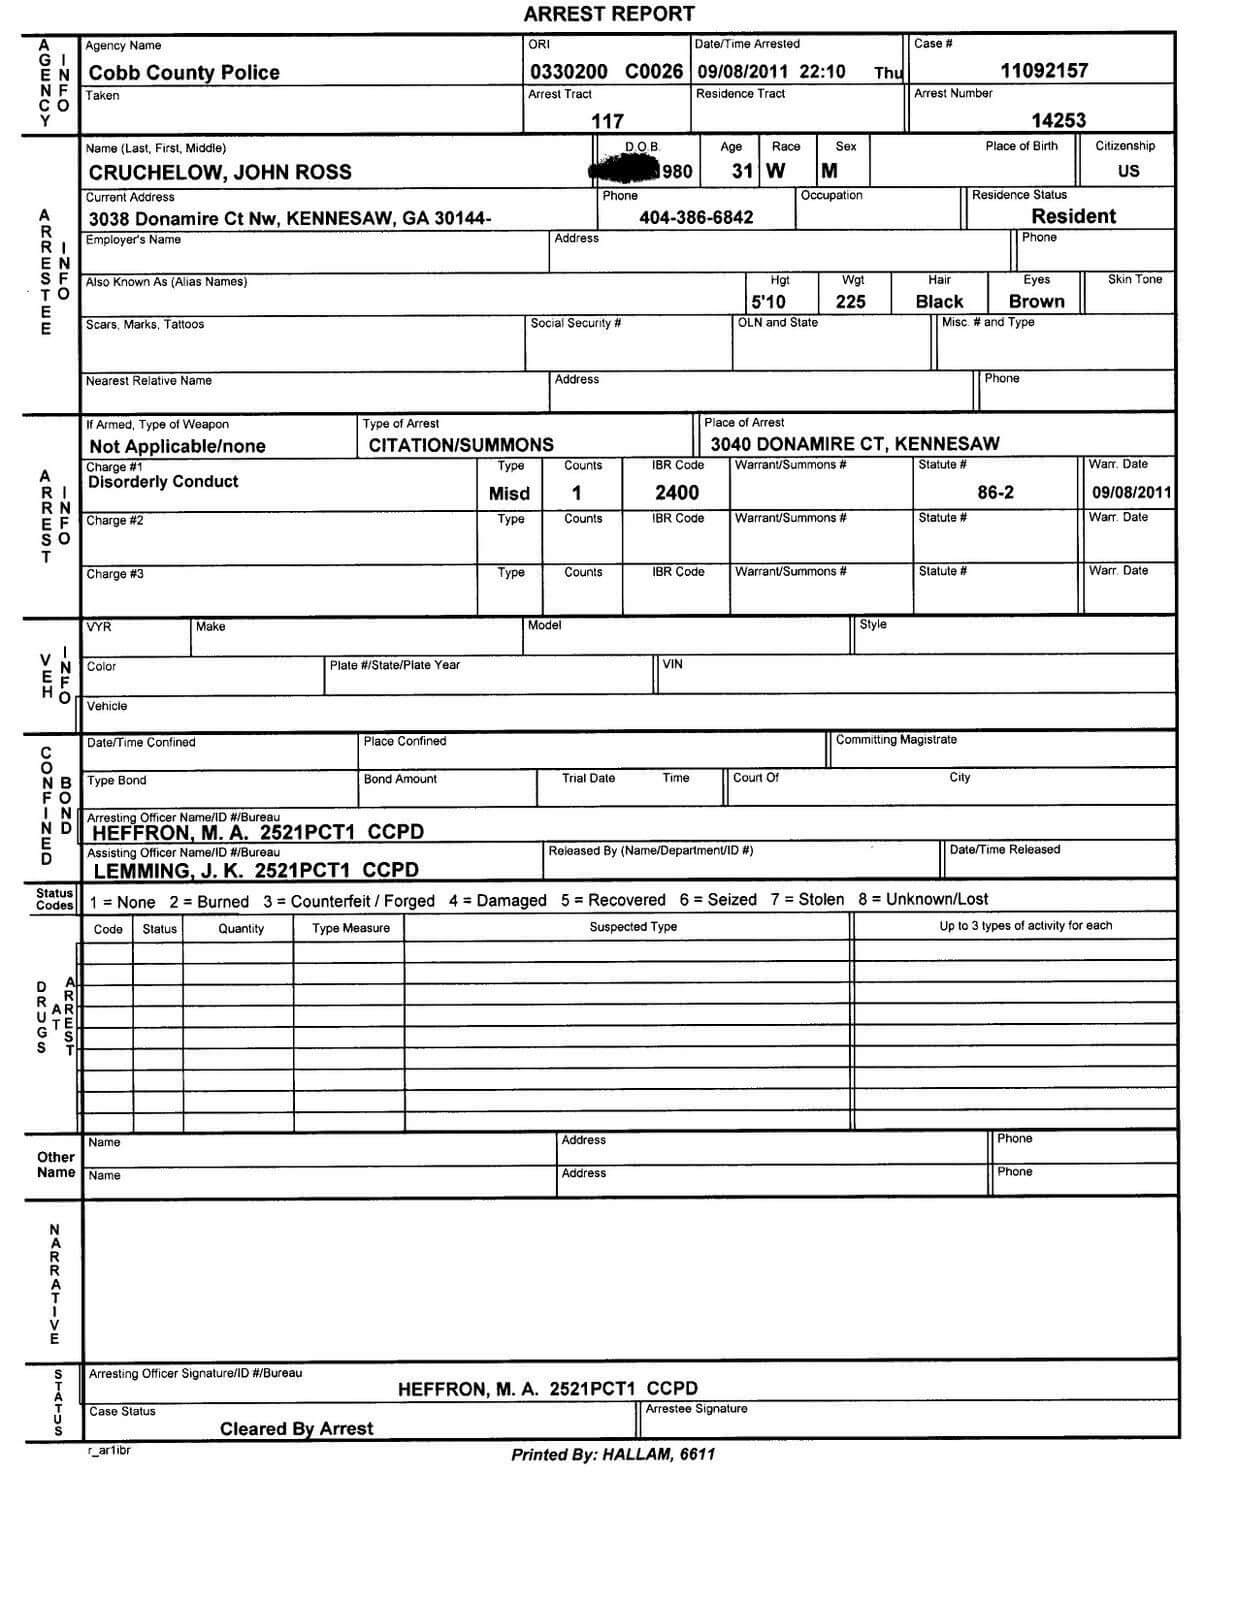 004 Blank Police Report Template Fantastic Ideas Free Throughout Blank Police Report Template